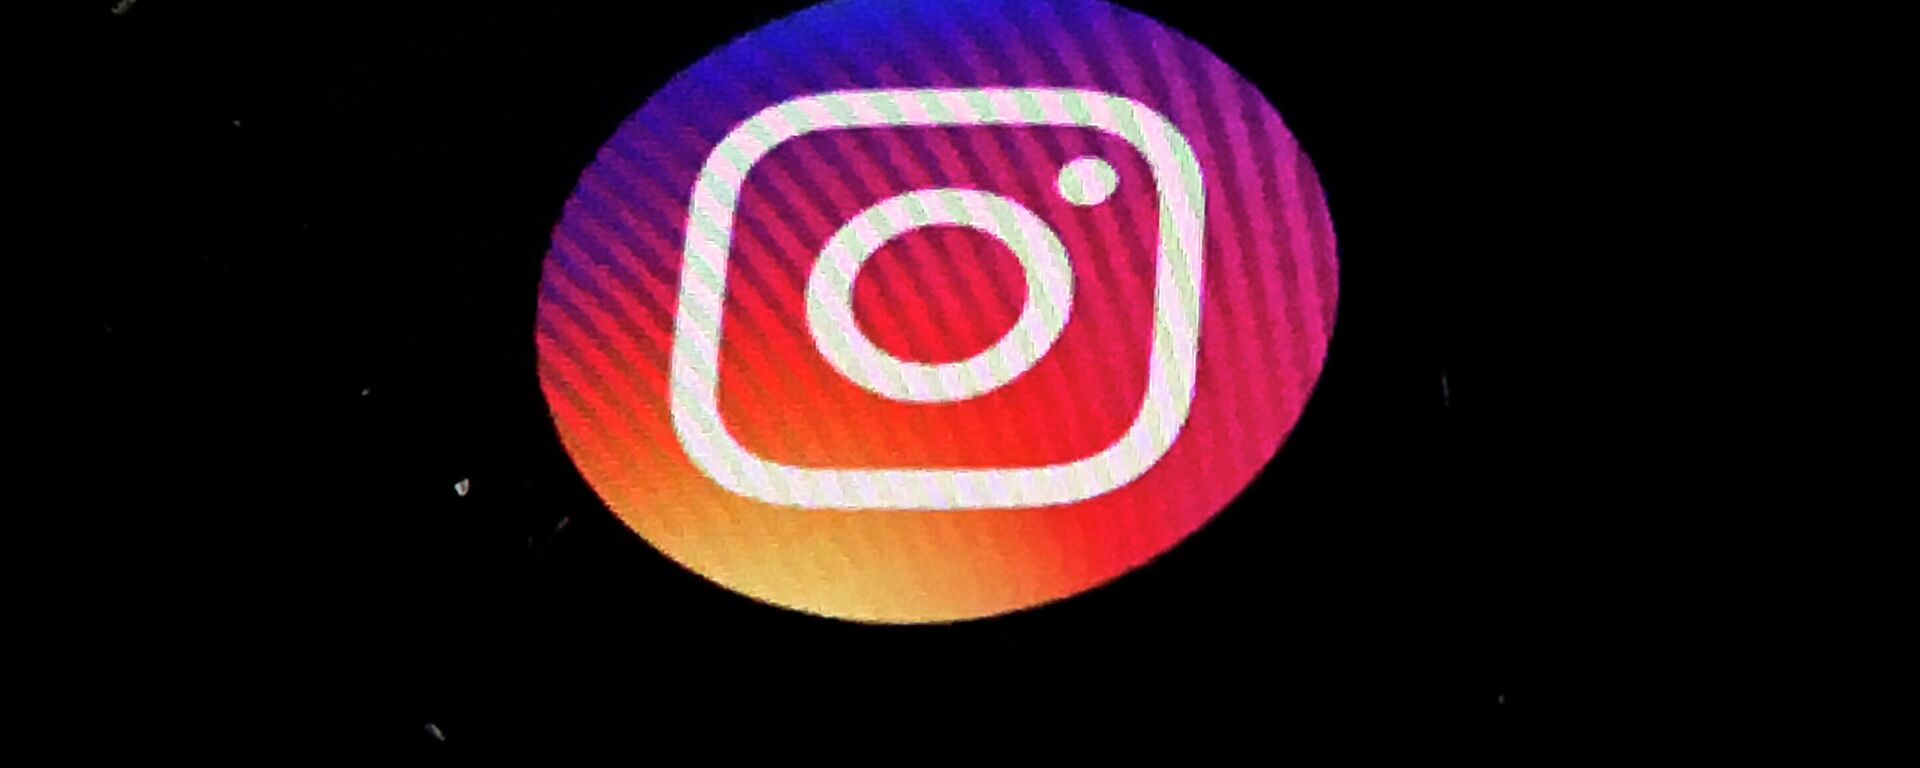 In this Nov. 29, 2018, file photo, the Instagram app logo is displayed on a mobile screen in Los Angeles. Political adversaries in Congress are united in outrage against Facebook for privately compiling information that its Instagram photo-sharing service appeared to grievously harm some teens, especially girls, while publicly downplaying the popular platform’s negative impact. - Sputnik International, 1920, 01.03.2022